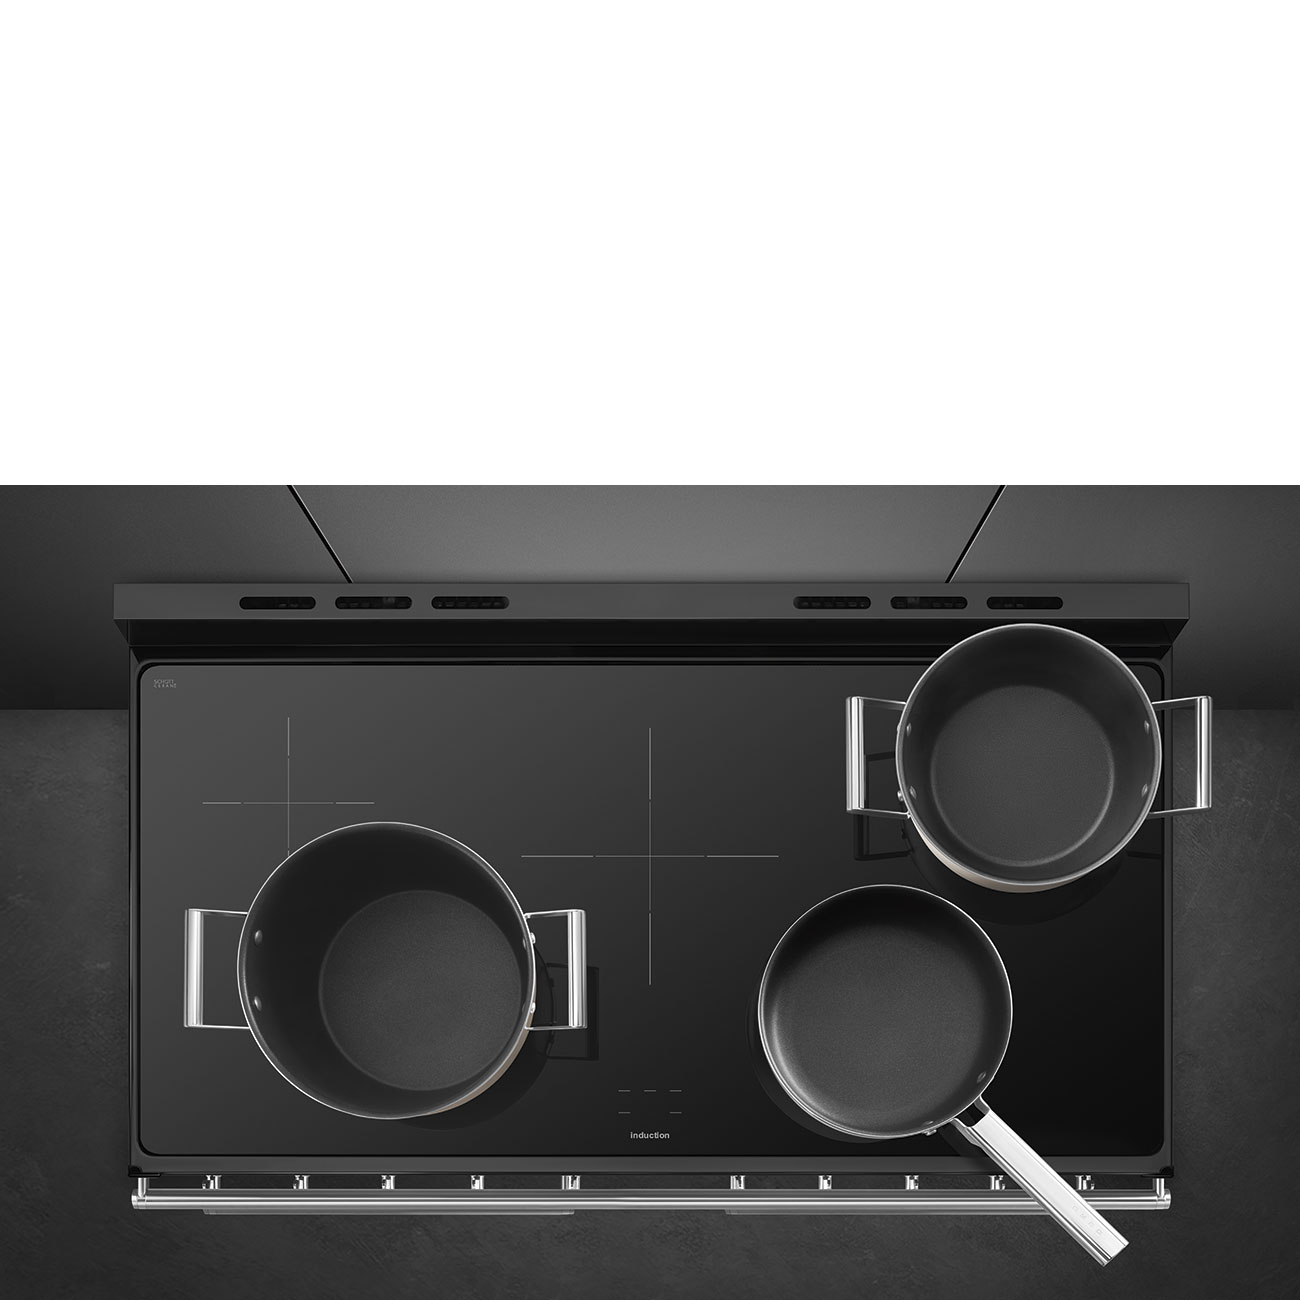 Smeg Stainless steel Cooker with Induction Hob_8